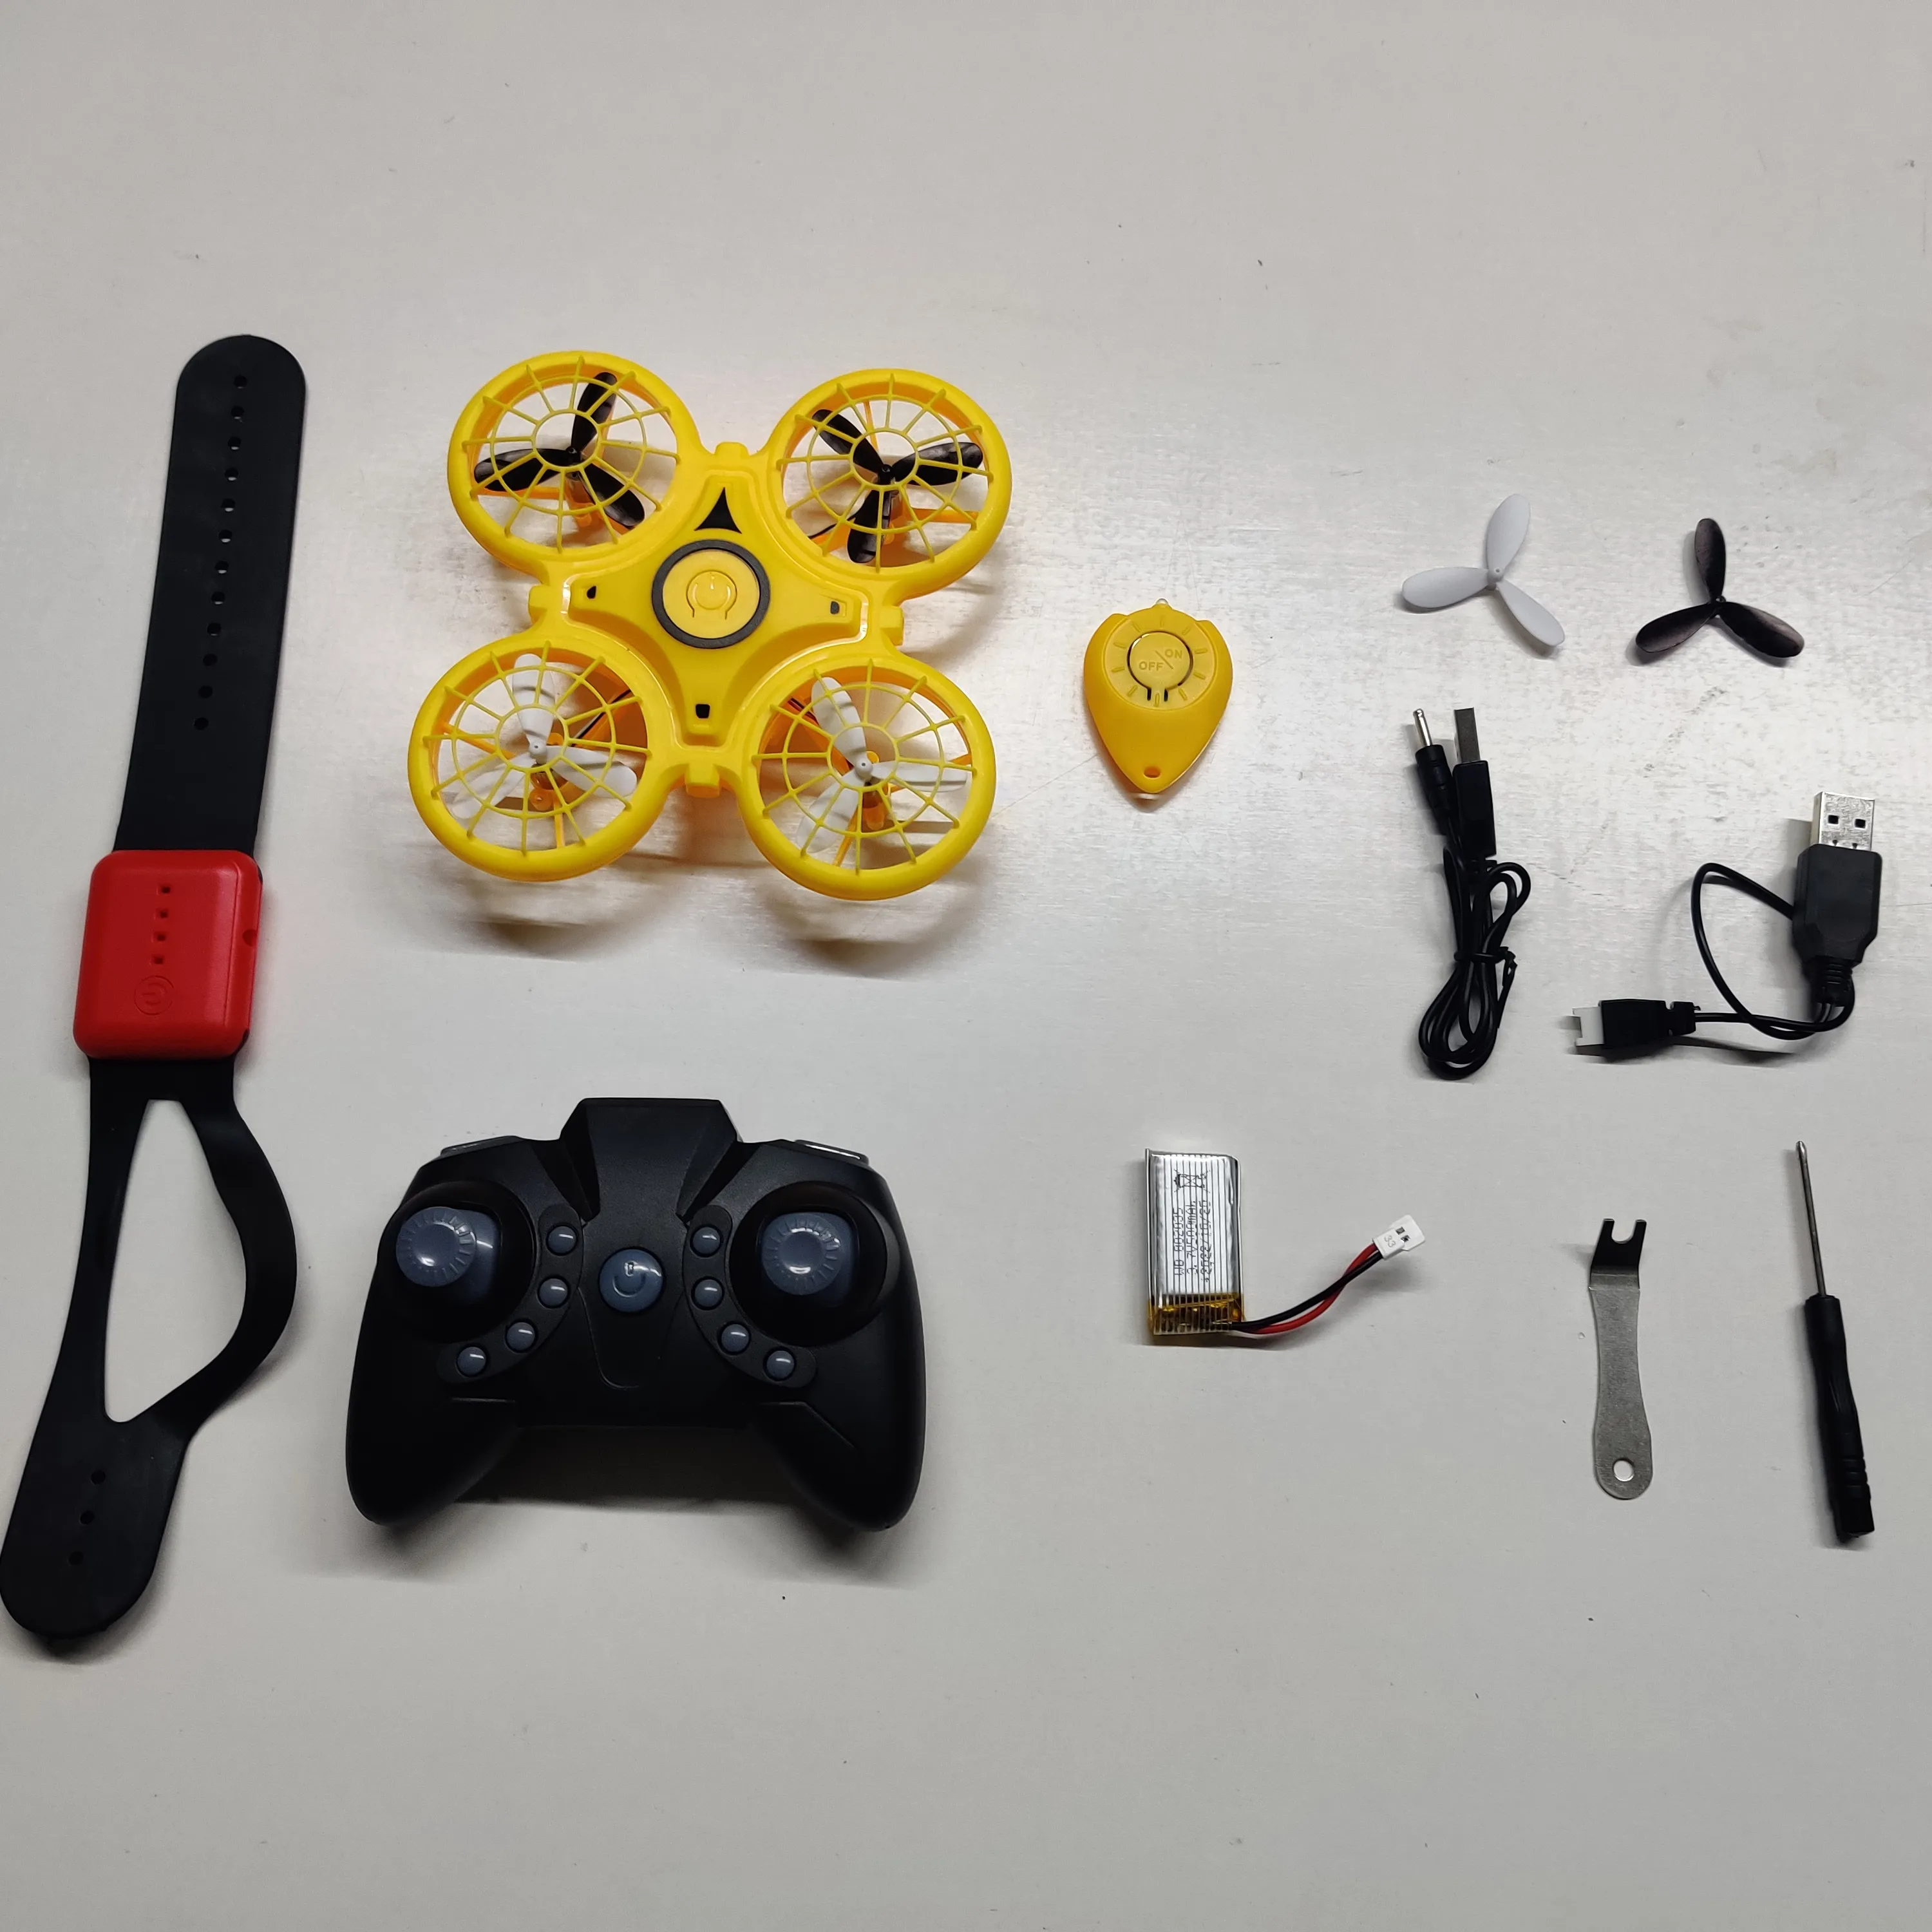 3IN1 multi-controller educational drone toys